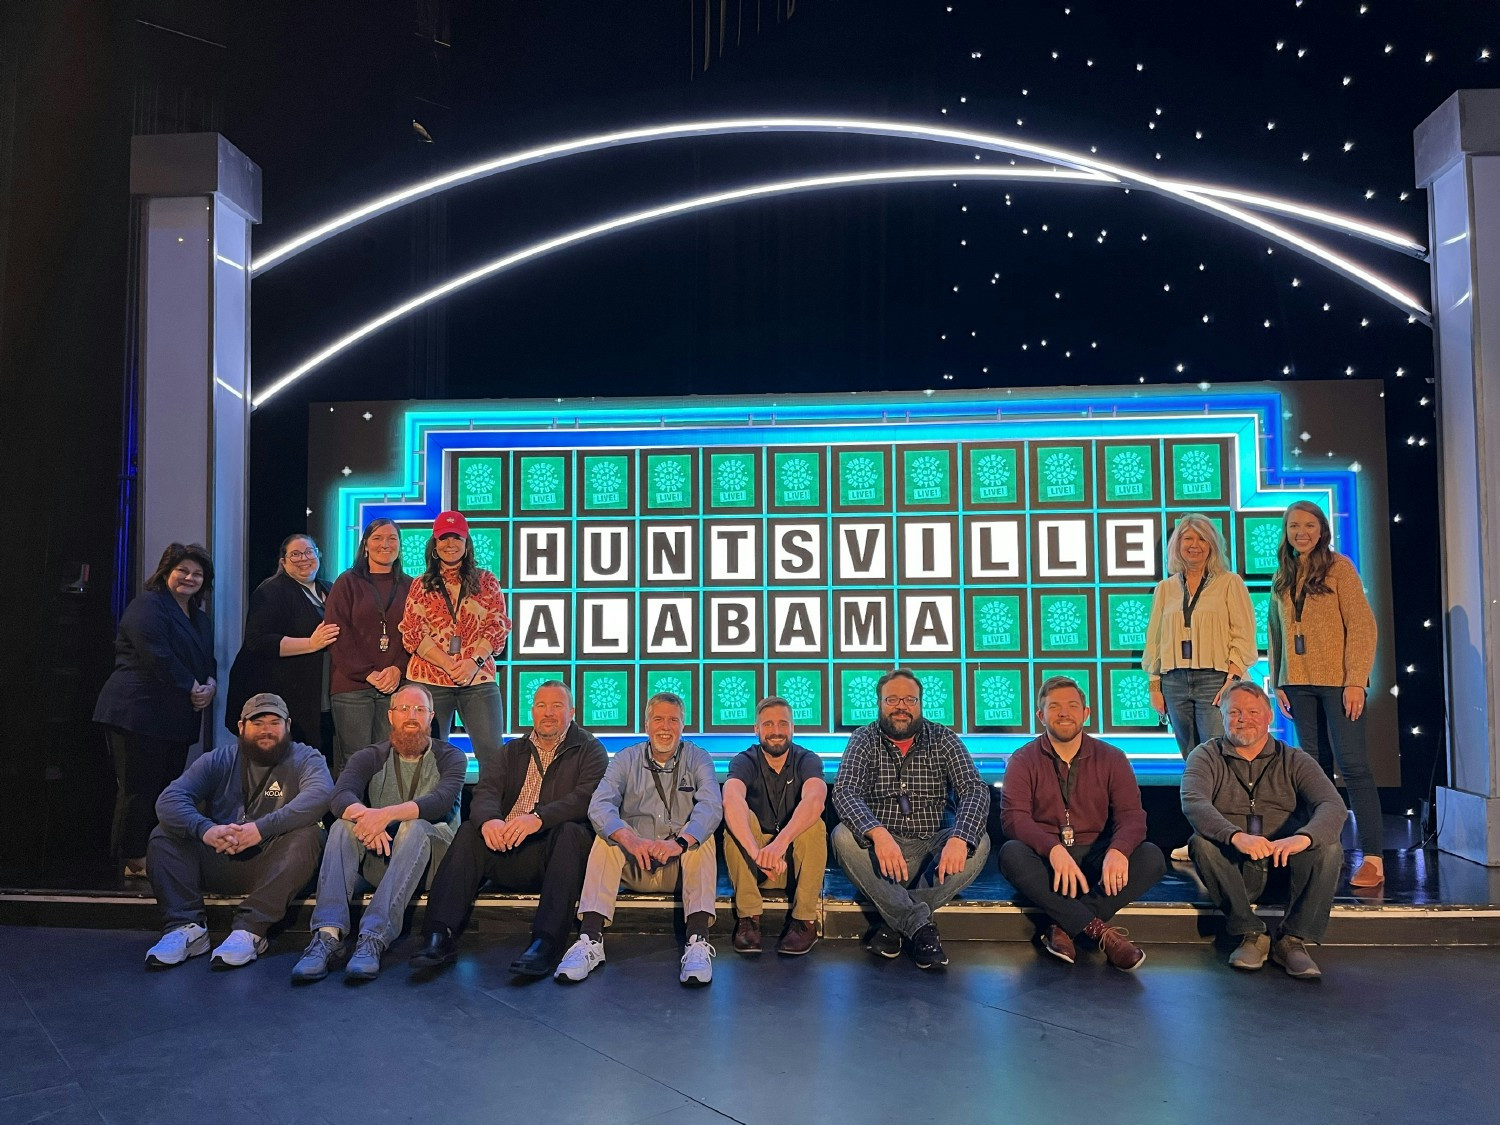 KODA Team Members Tested Their Wit at the Local Wheel of Fortune Event in Huntsville, AL